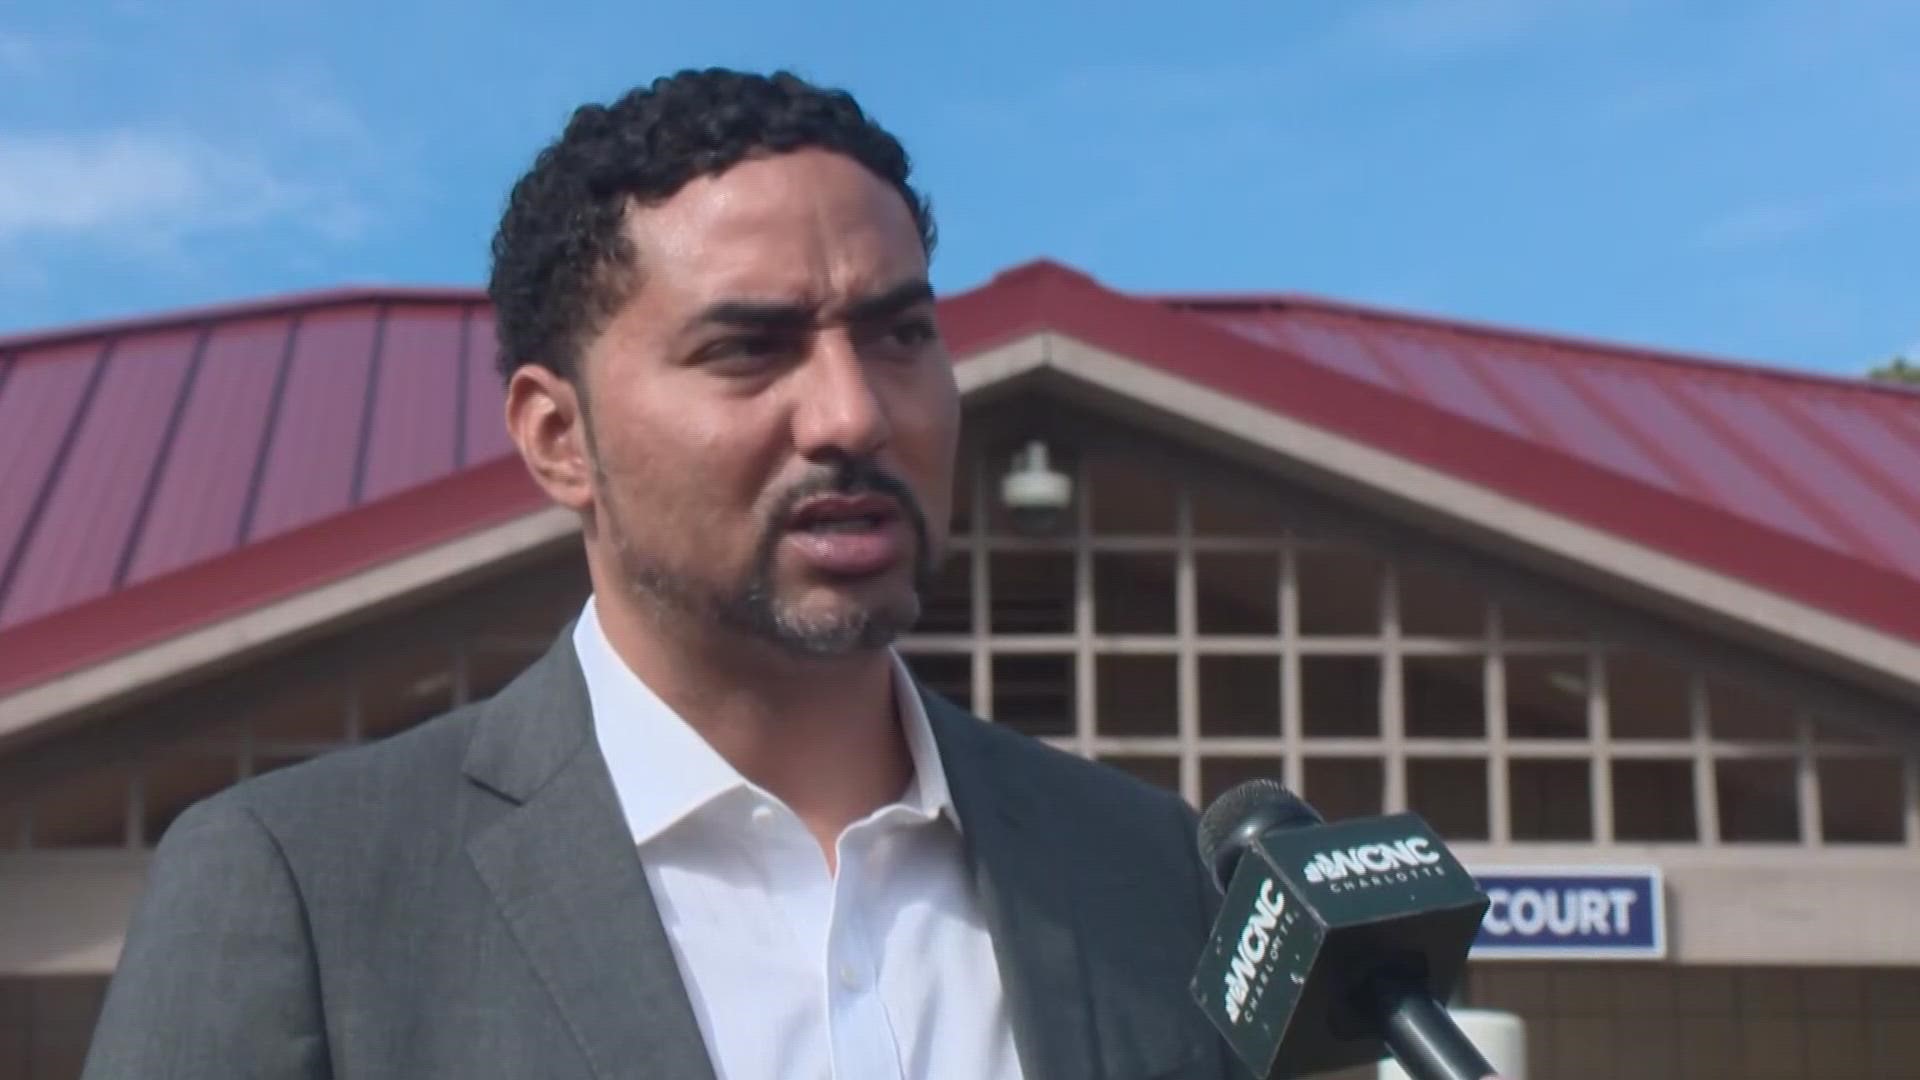 Justin Bamberg, attorney for Travis Price in a trial involving a former police officer, questions the credibility of the Rock Hill Police Department's documentation.